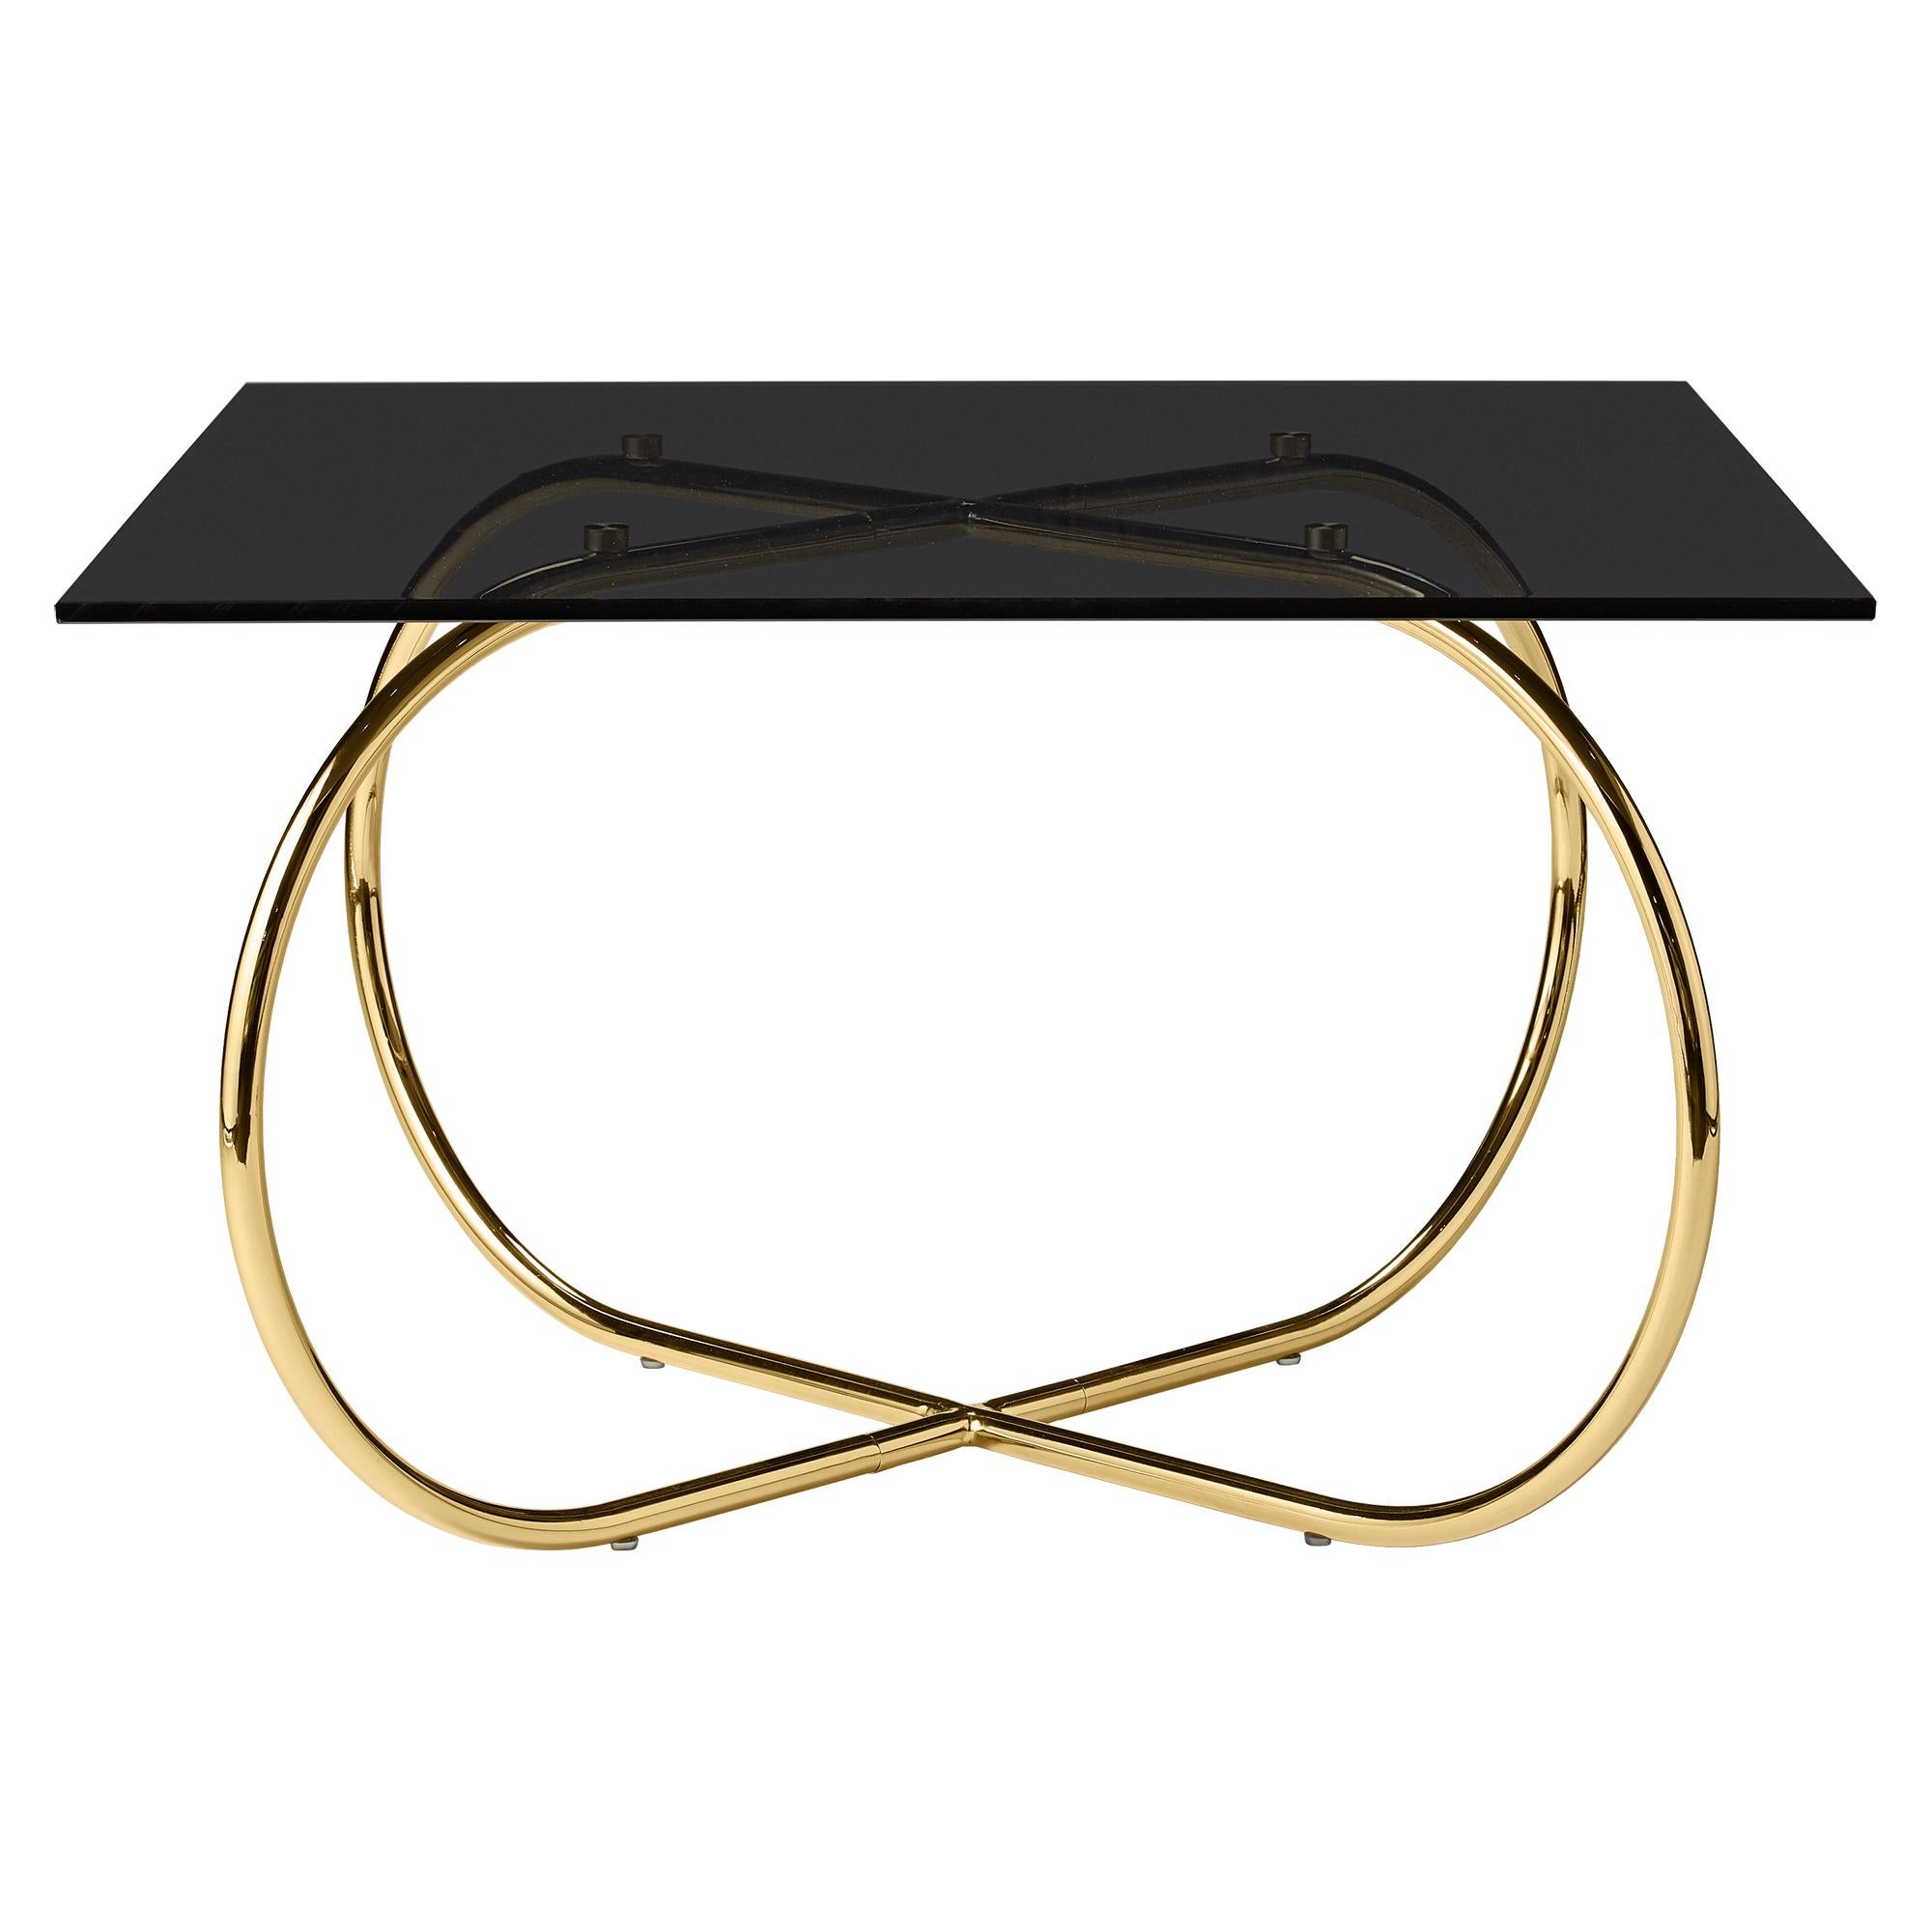 Angui golden coffee table by AYTM
Dimensions: 75 x 75 x 45 cm
Materials: Glass, copper, MDF

The Angui with its pipe style frame and light glass top will enhance the look of your living room. The Angui collection is a beautiful range of